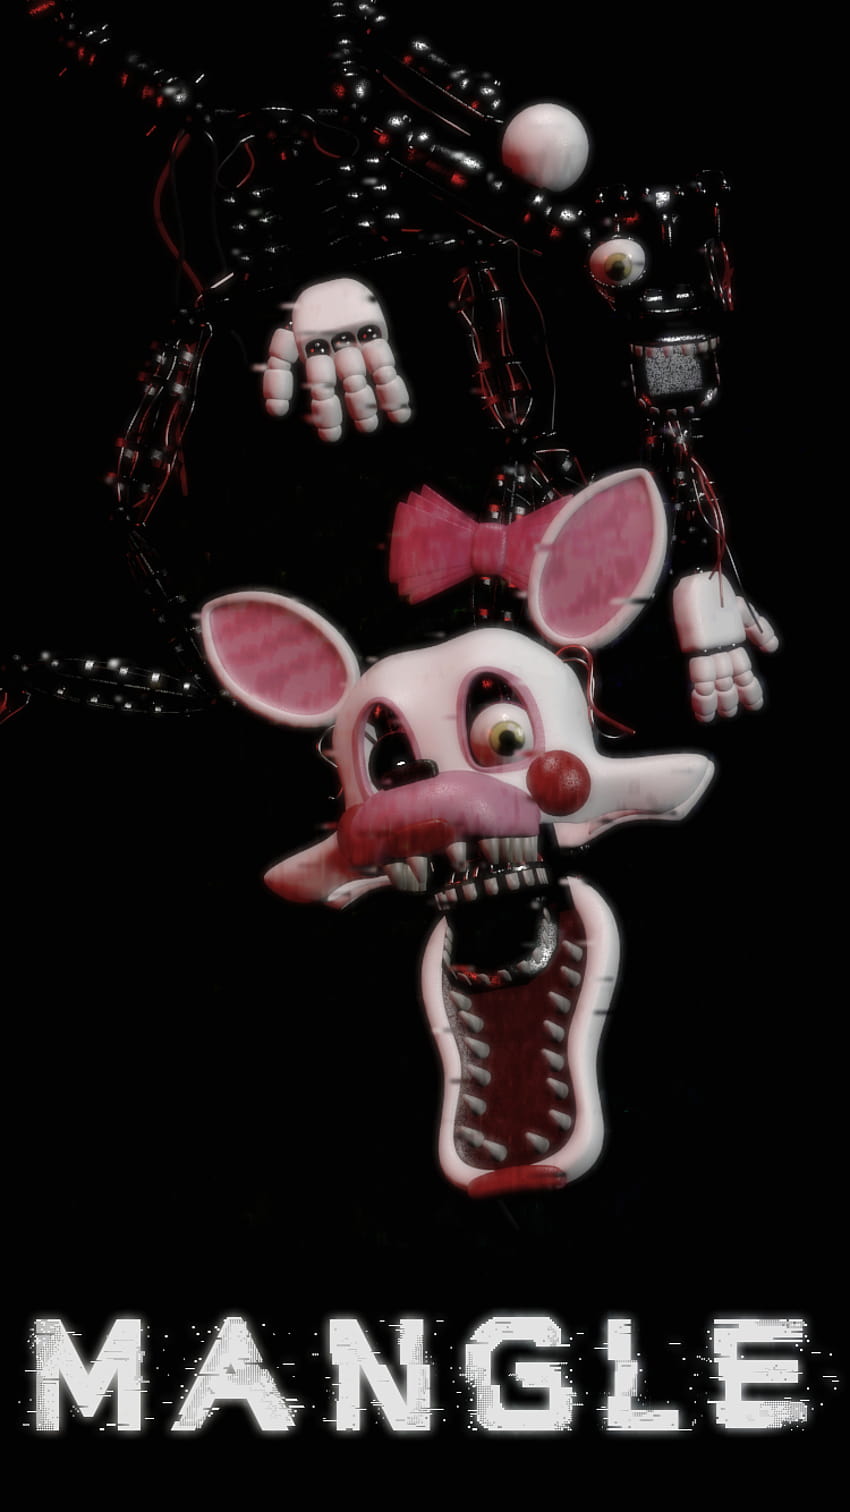 Fnaf Mangle posted by Michelle Sellers, fnaf iphone HD phone wallpaper